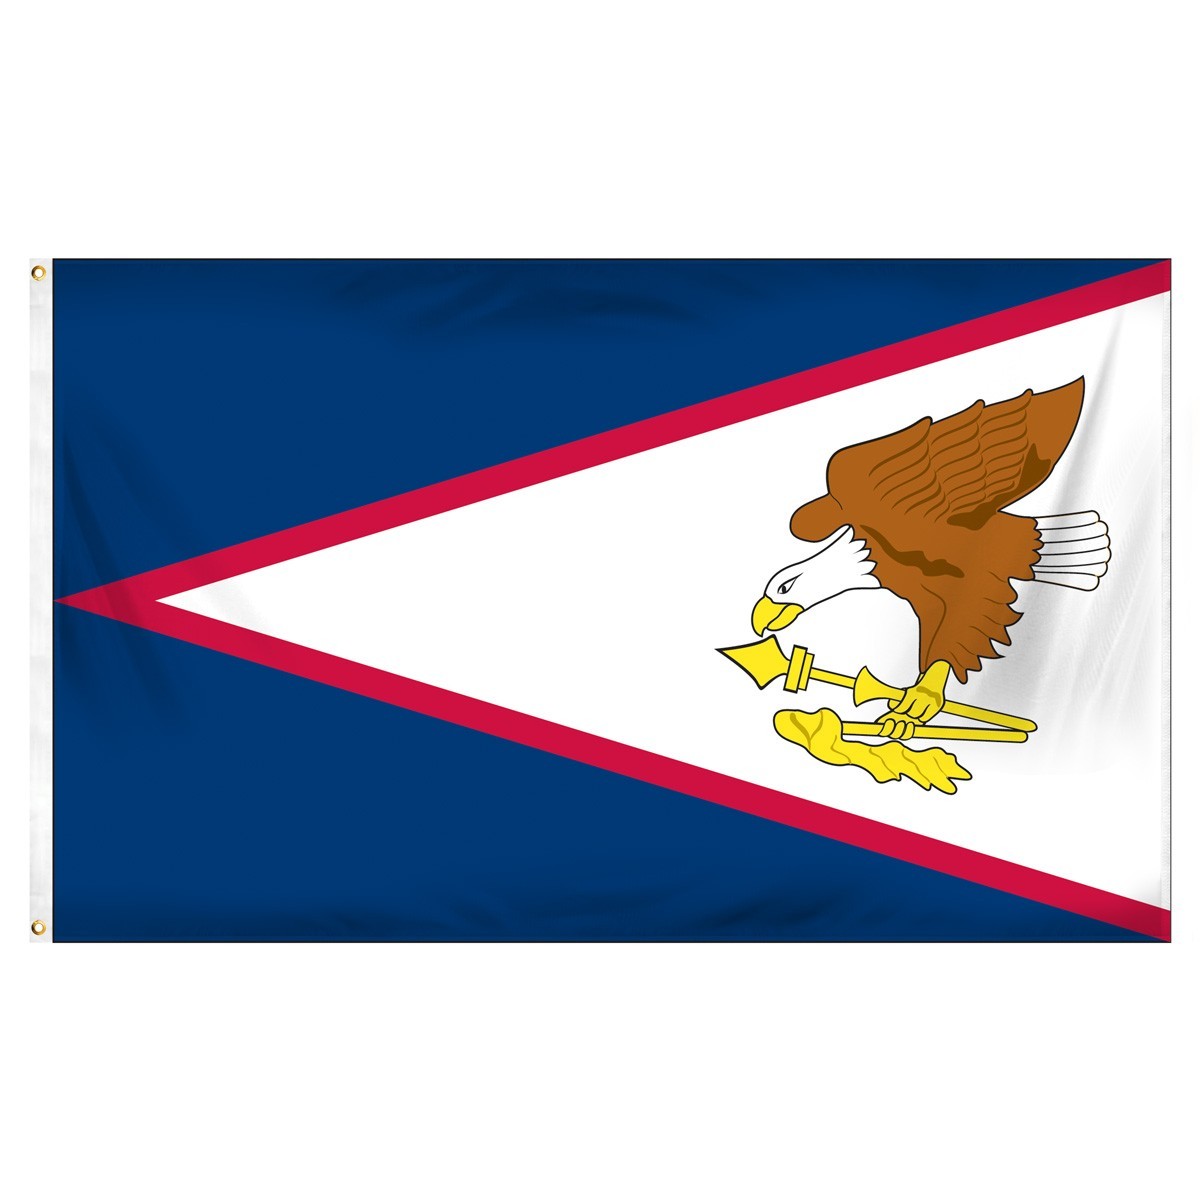 American Samoa flags for sale polyester cheap school church business world flags